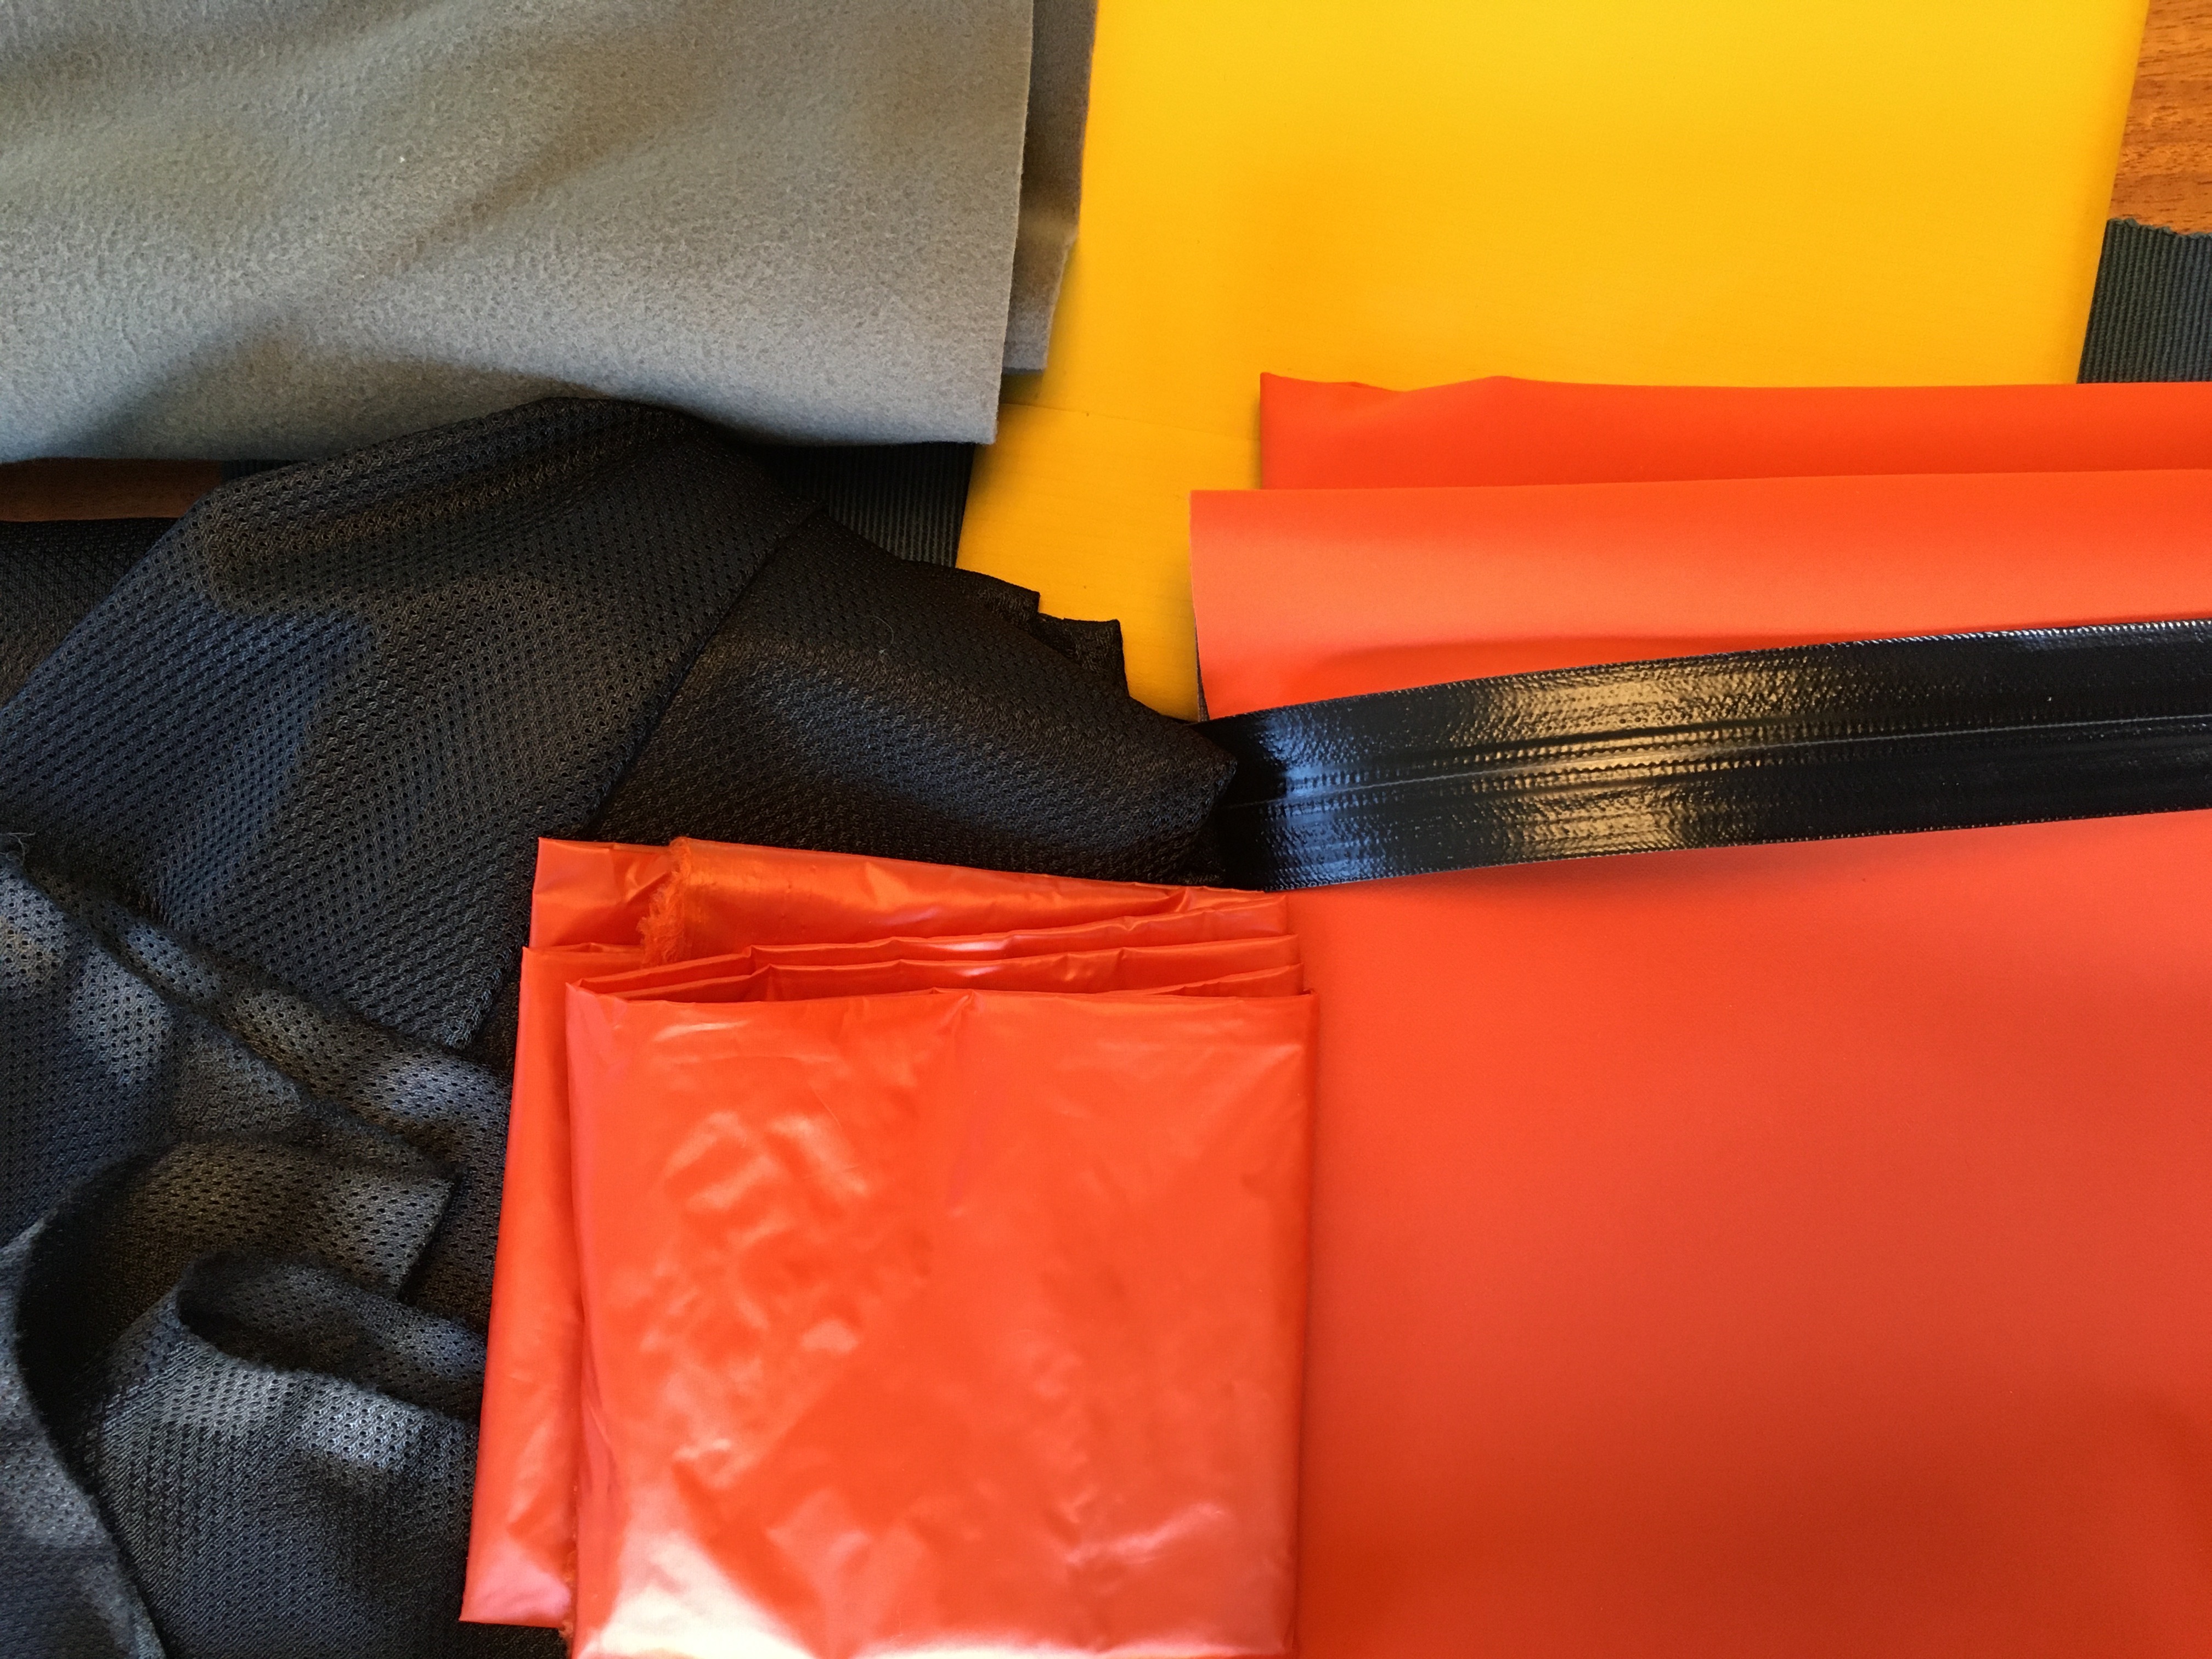 Jersey mesh and taffeta for the liner. Microfleece for the collar and pockets. SWB-Tex for the shell. Waterproof zipper.